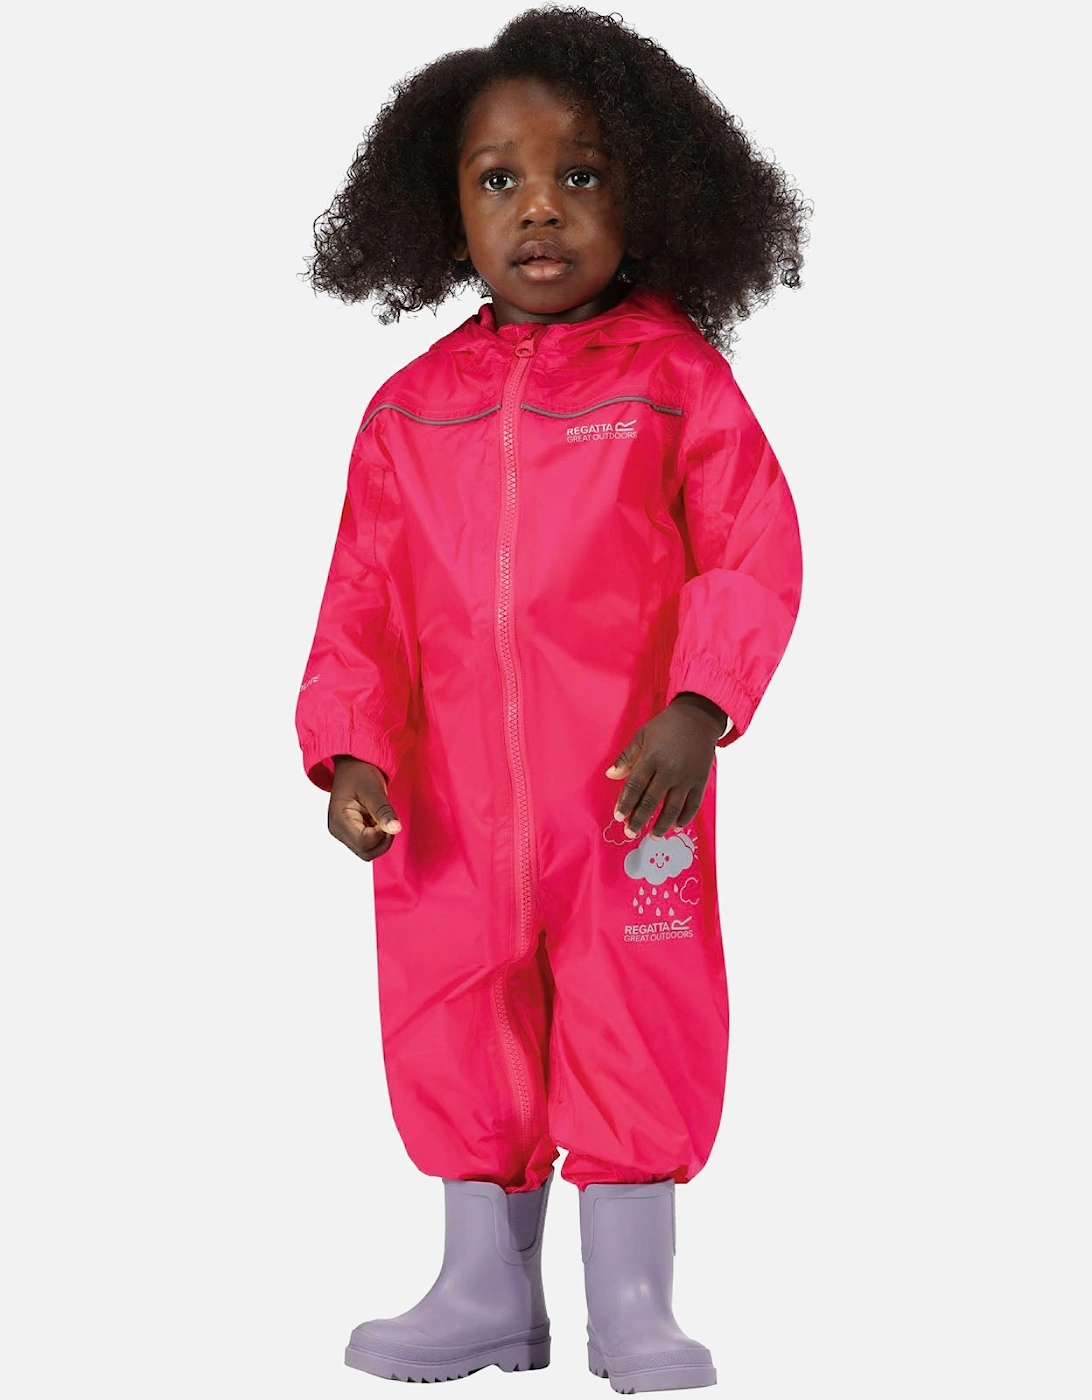 Kids Puddle IV Waterproof Puddle Suit, 34 of 33